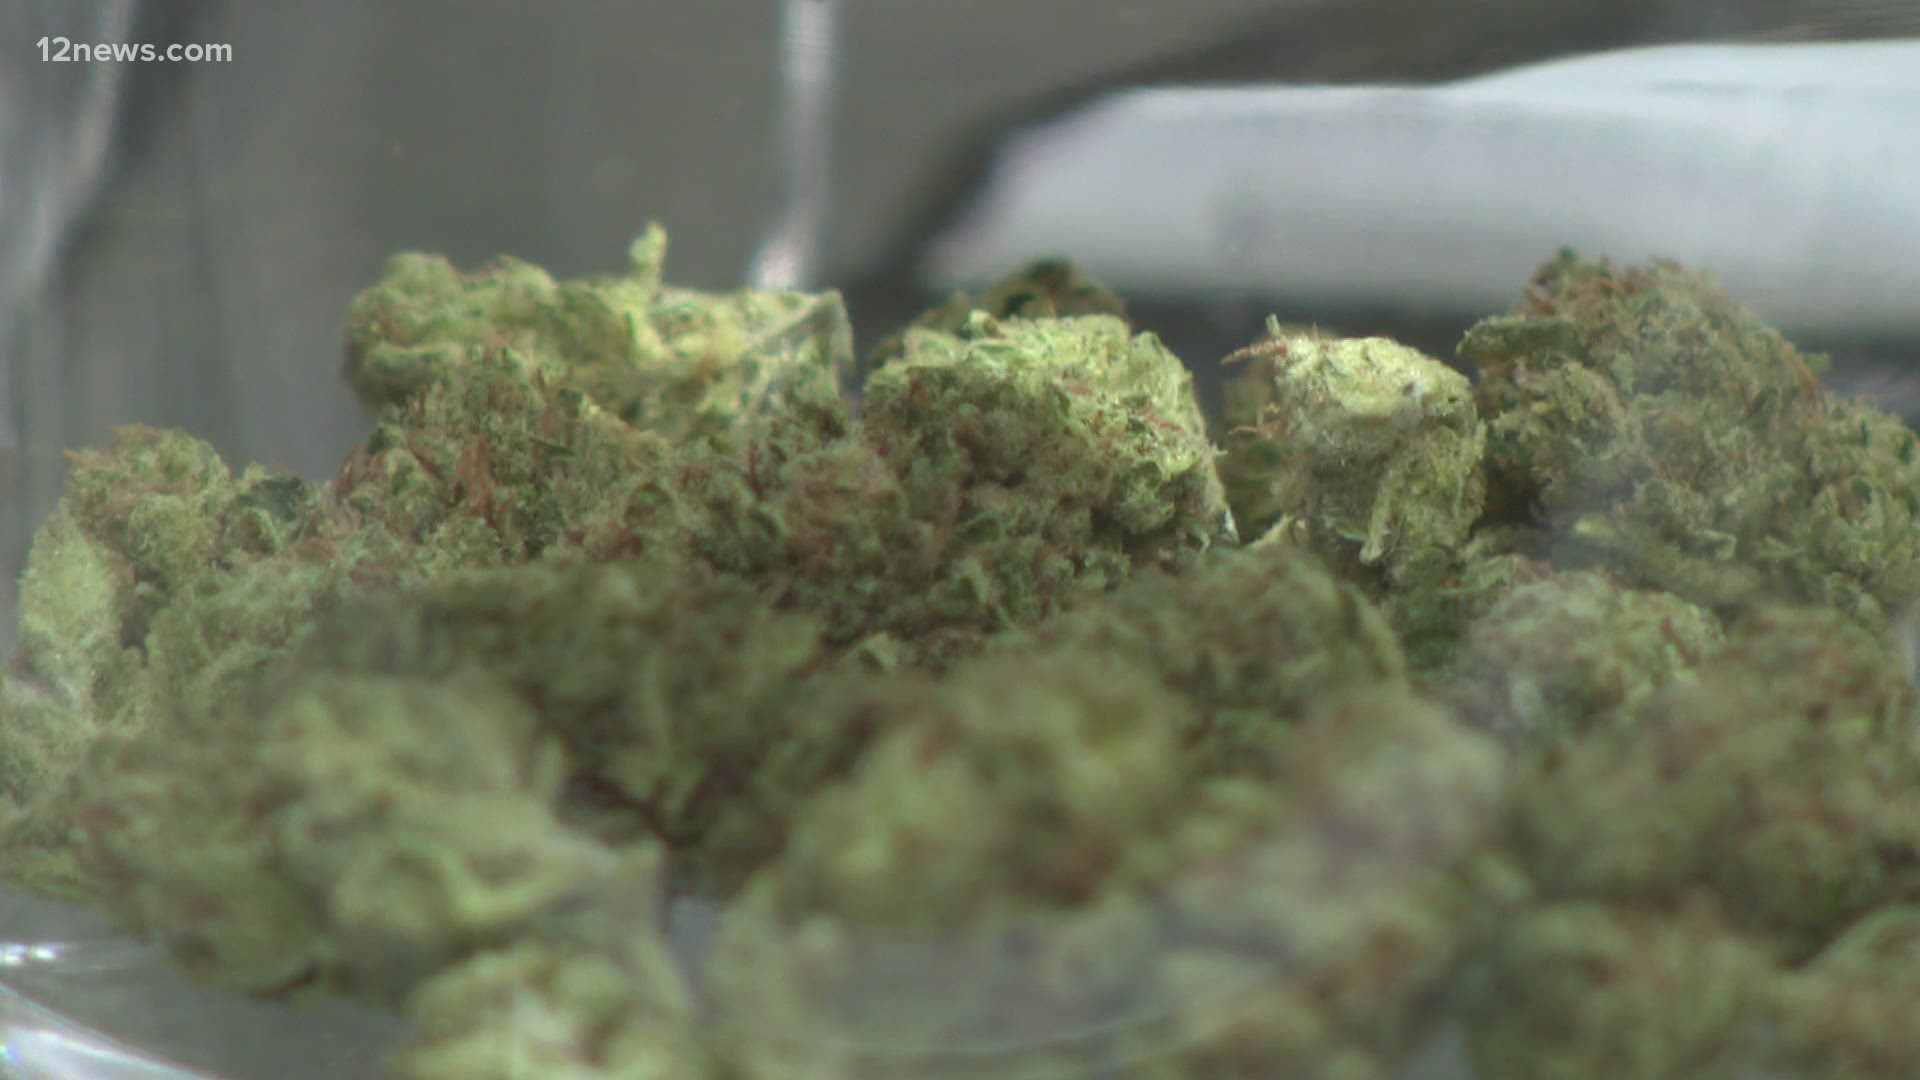 A new effort is underway to help get people with cannabis charges cleared since recreational marijuana is now legal in Arizona.